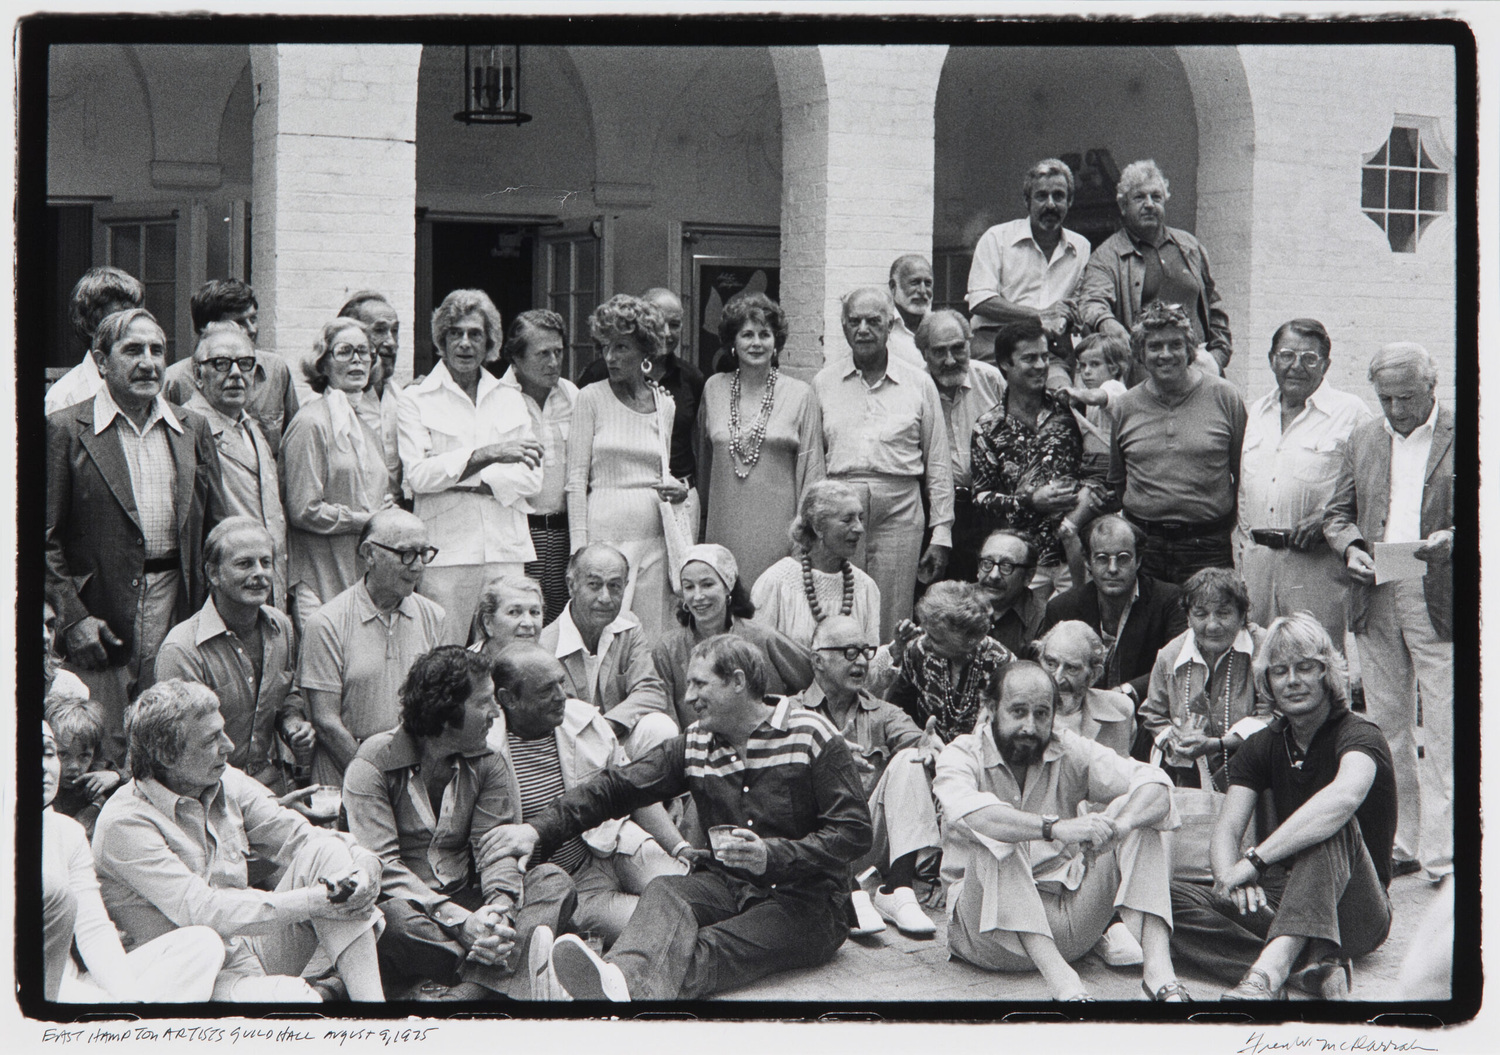 Fred W. McDarrah, “East Hampton Artists in Front of Guild Hall,” 1975. Vintage photograph. 16” x 20.” Gift of the artist.